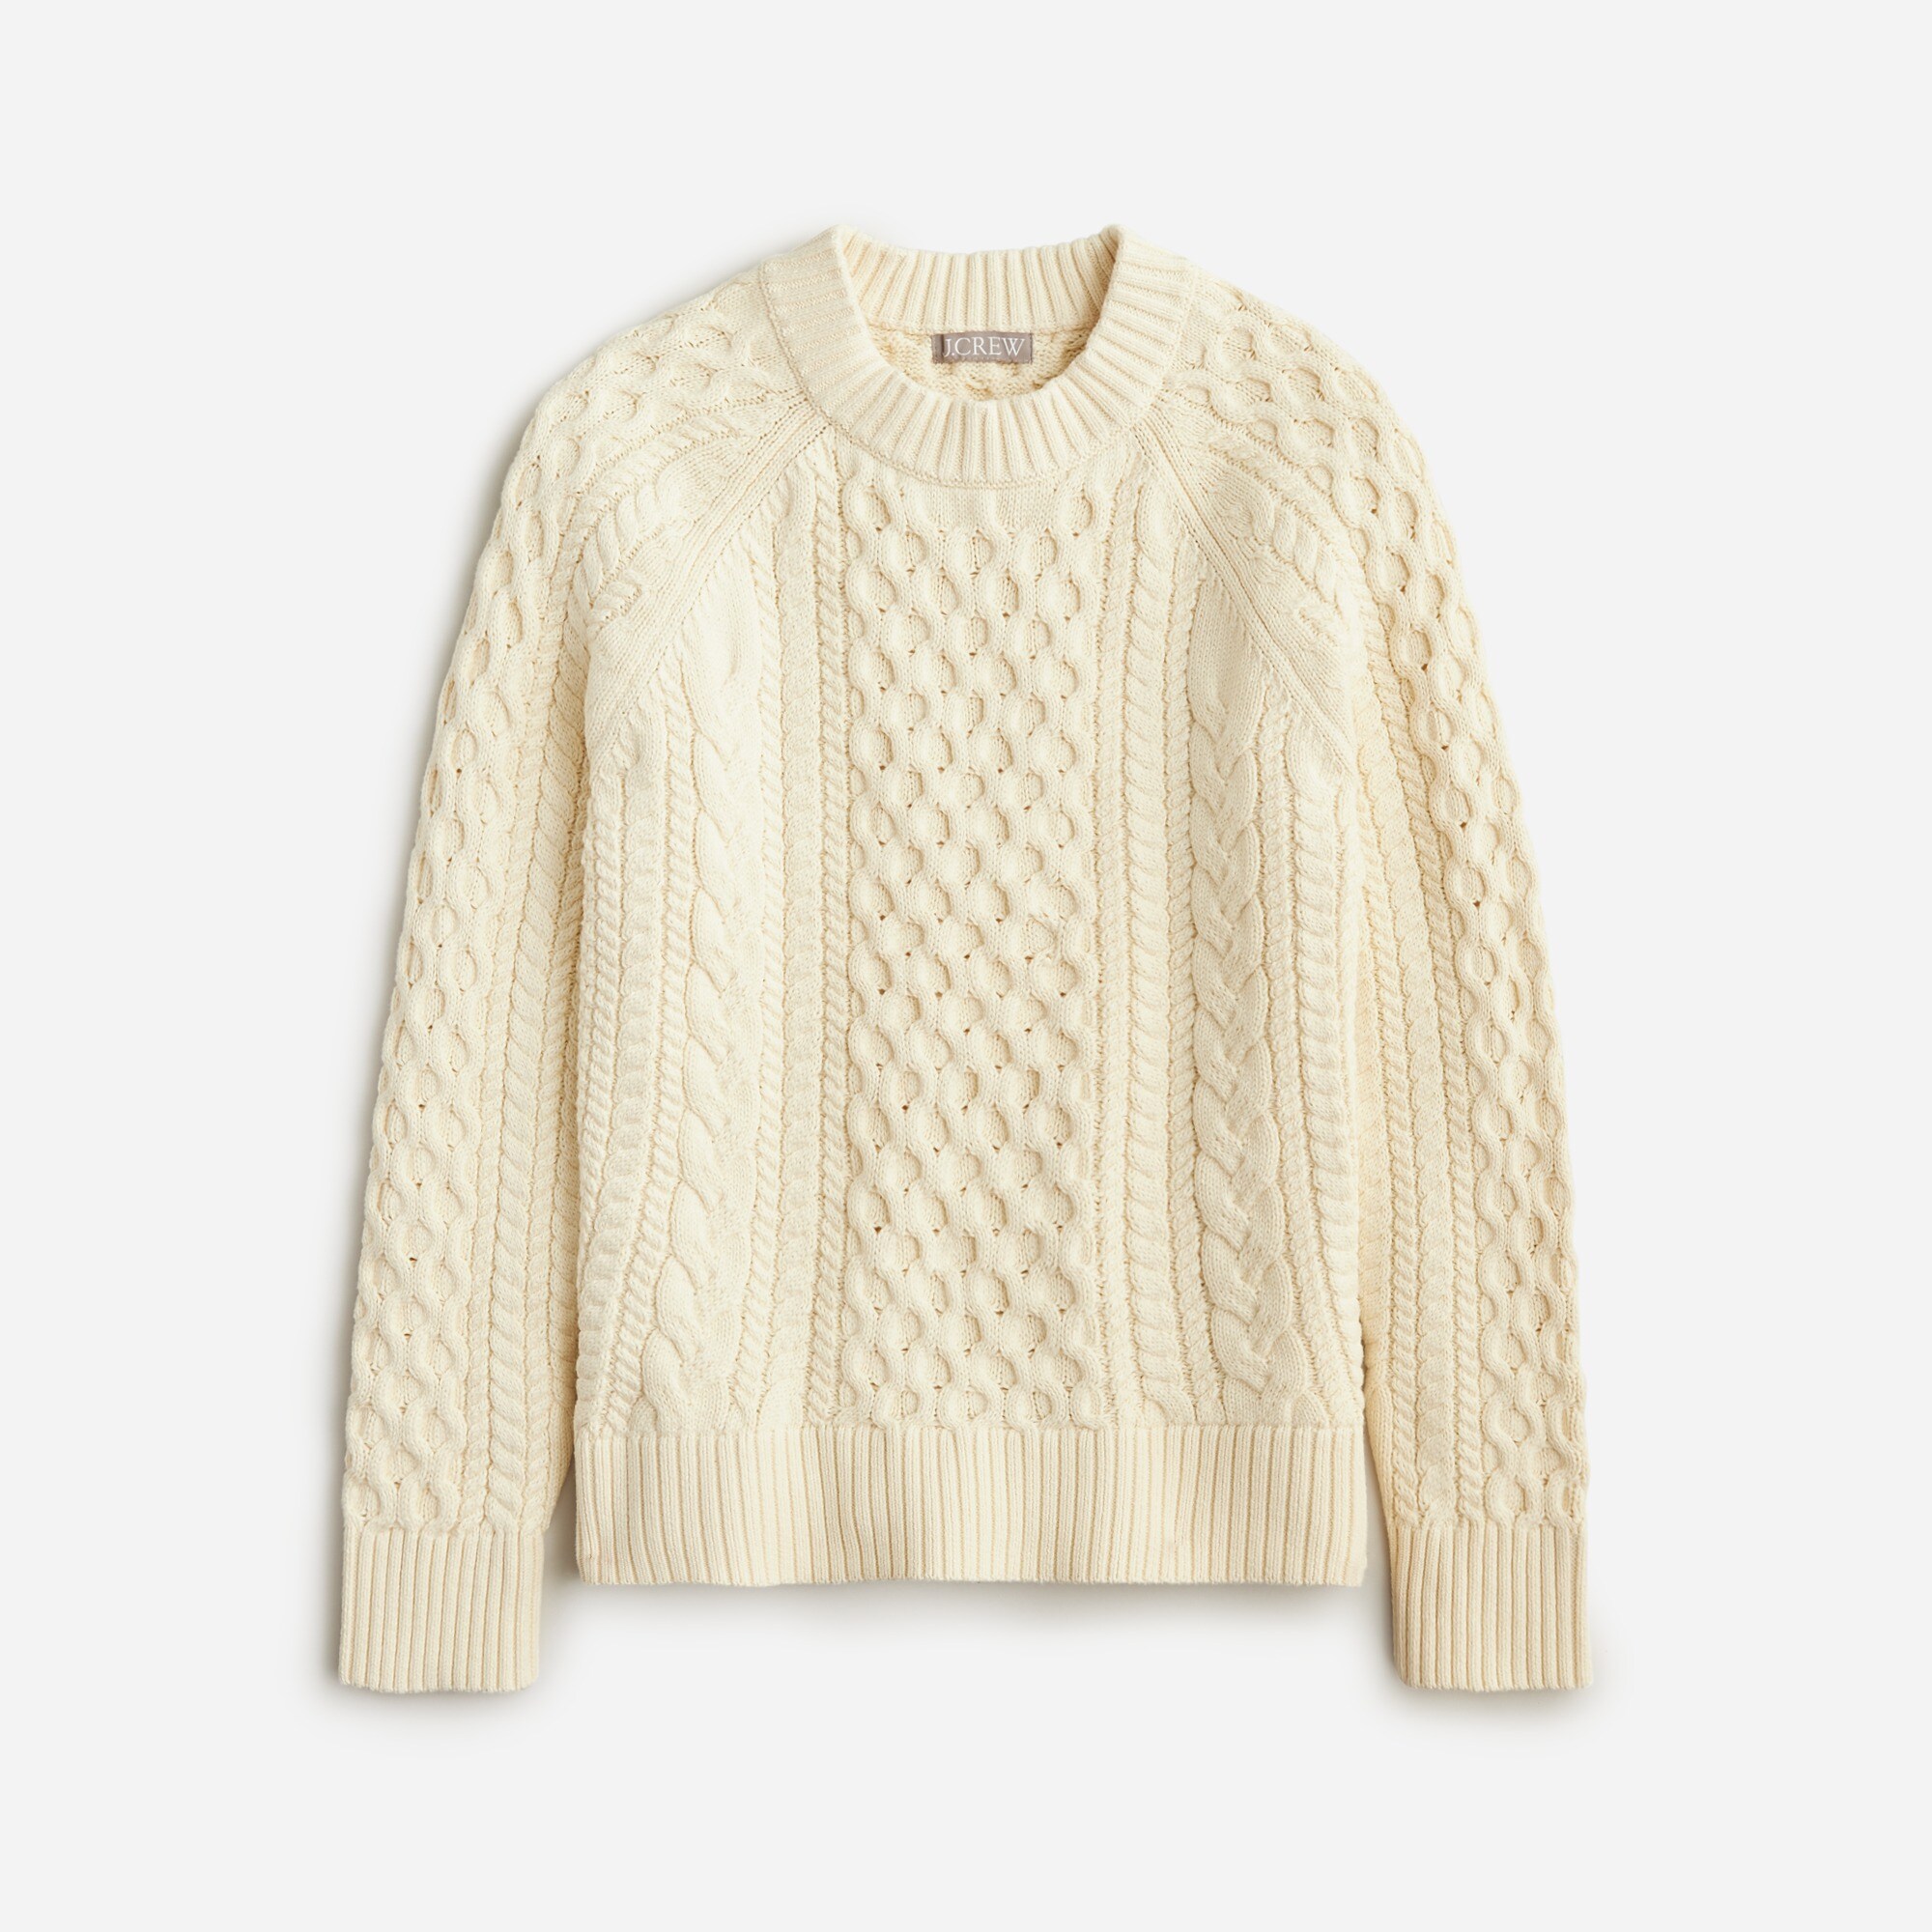  Cable-knit crewneck sweater